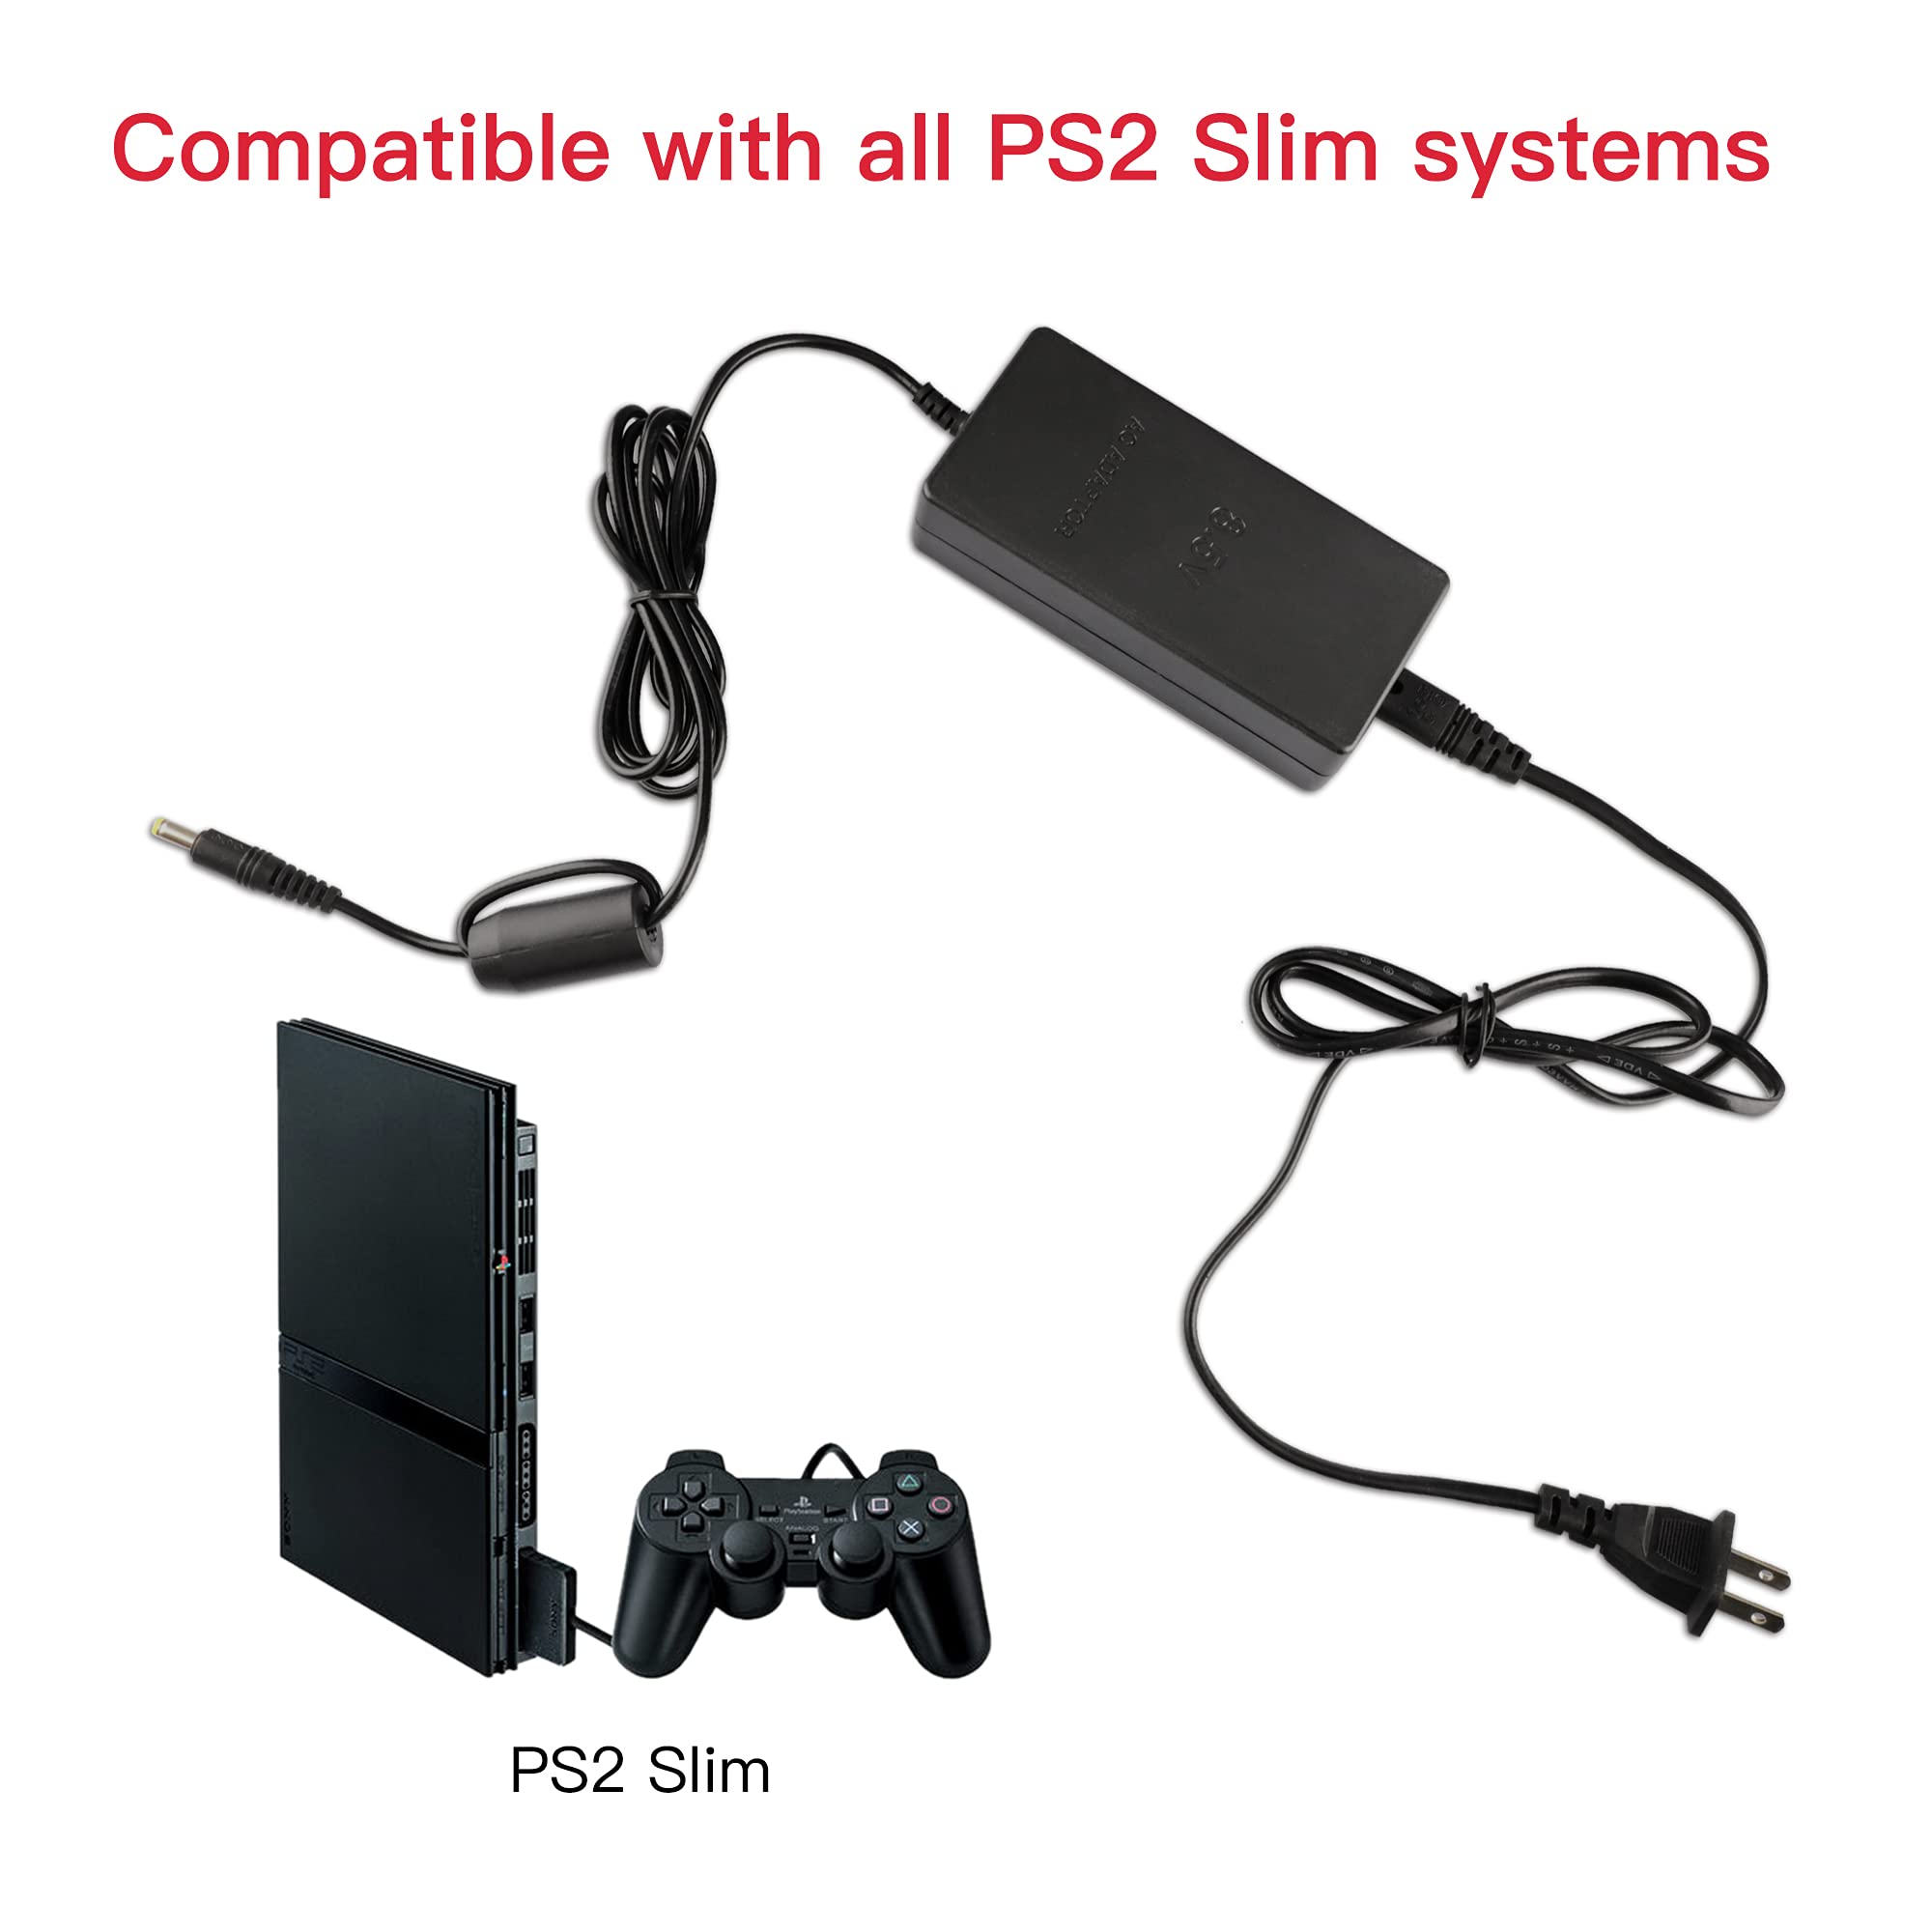 Power Supply for PS2, AC Adapter Charger Cable Cord for Sony Playstation 2 PS2 Slim A/C 70000 Console